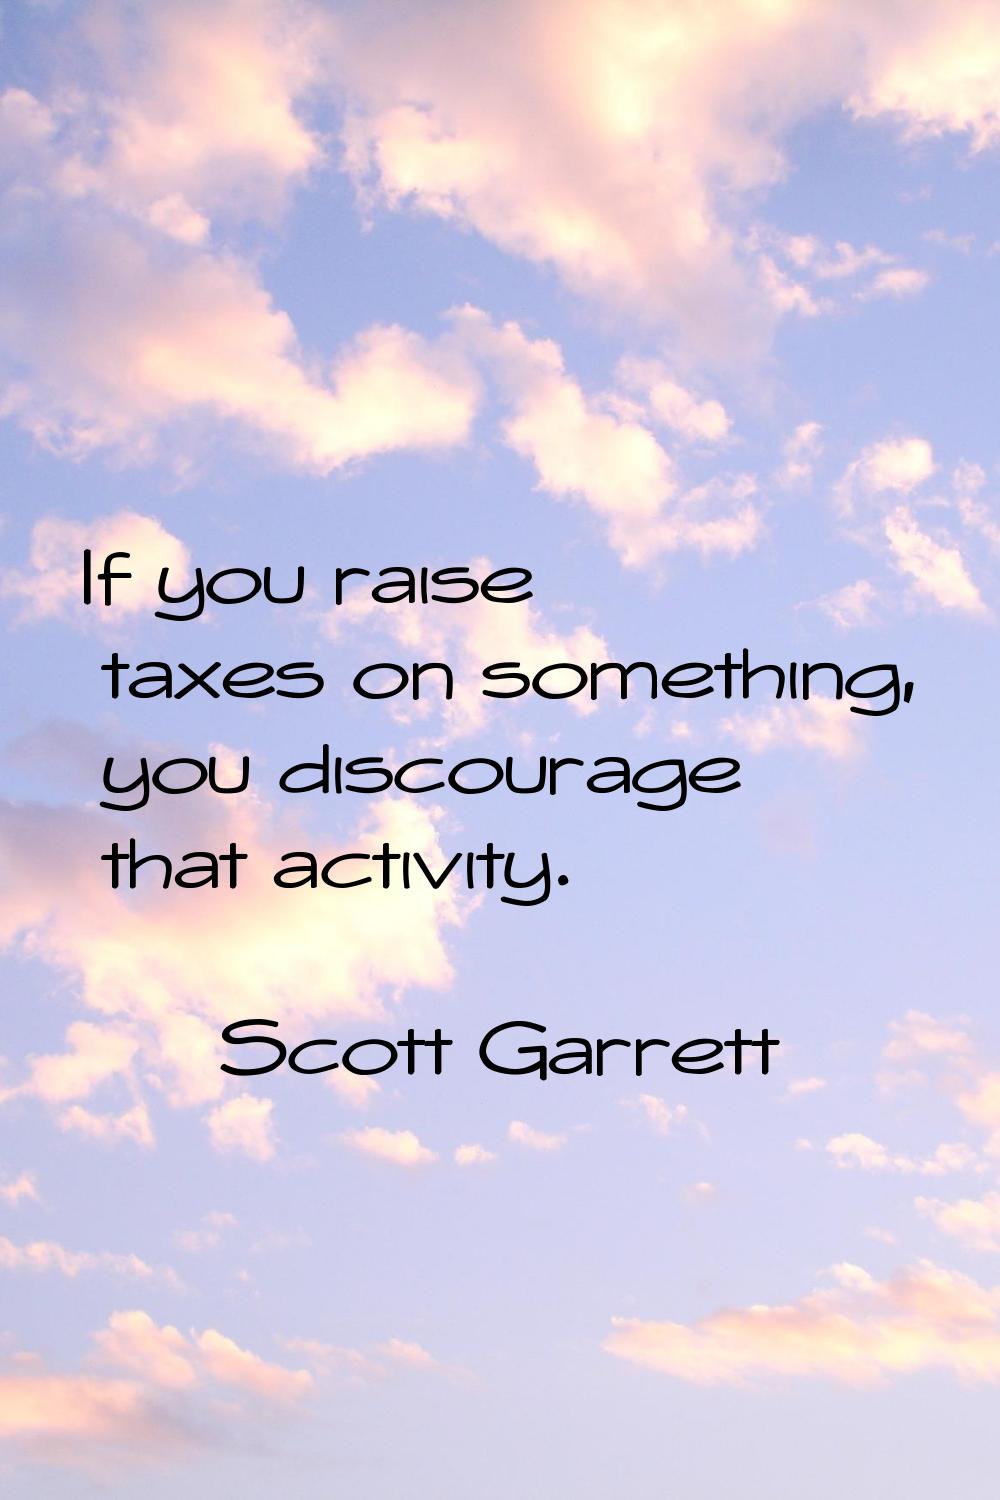 If you raise taxes on something, you discourage that activity.